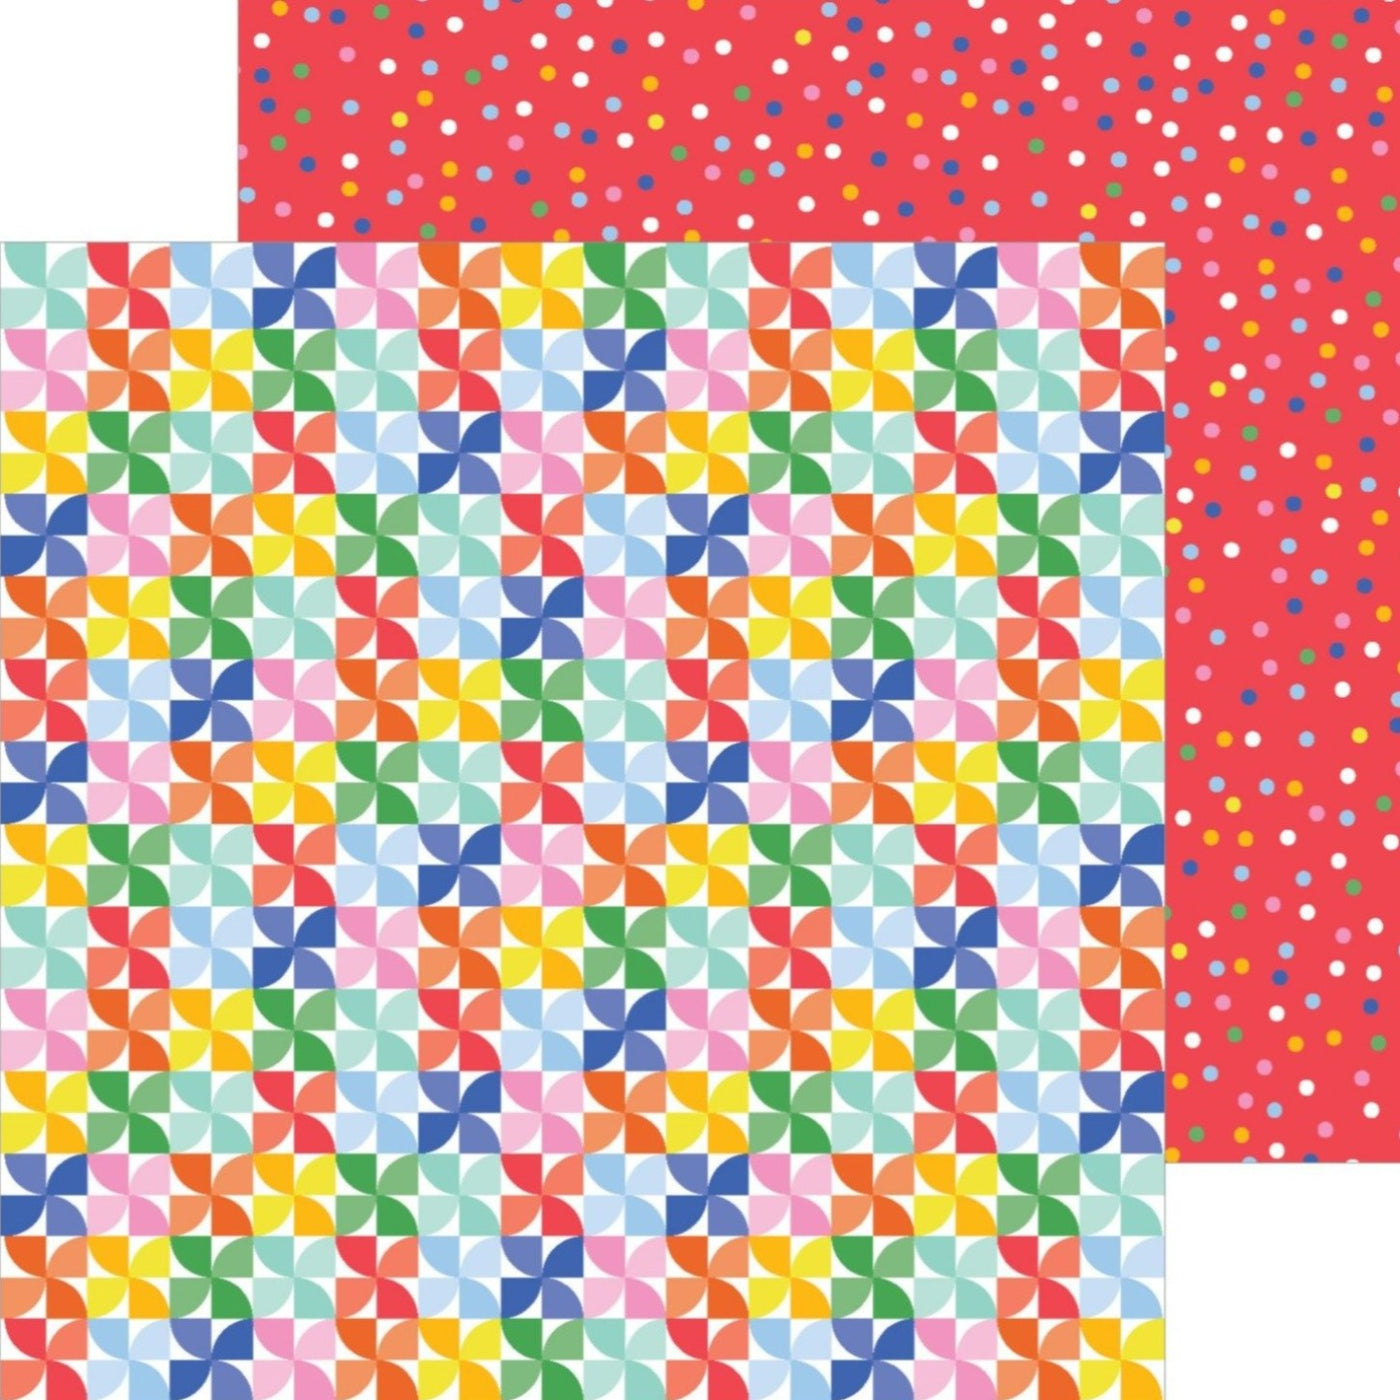 PINWHEELS - 12x12 Double-Sided Patterned Cardstock - Pebbles